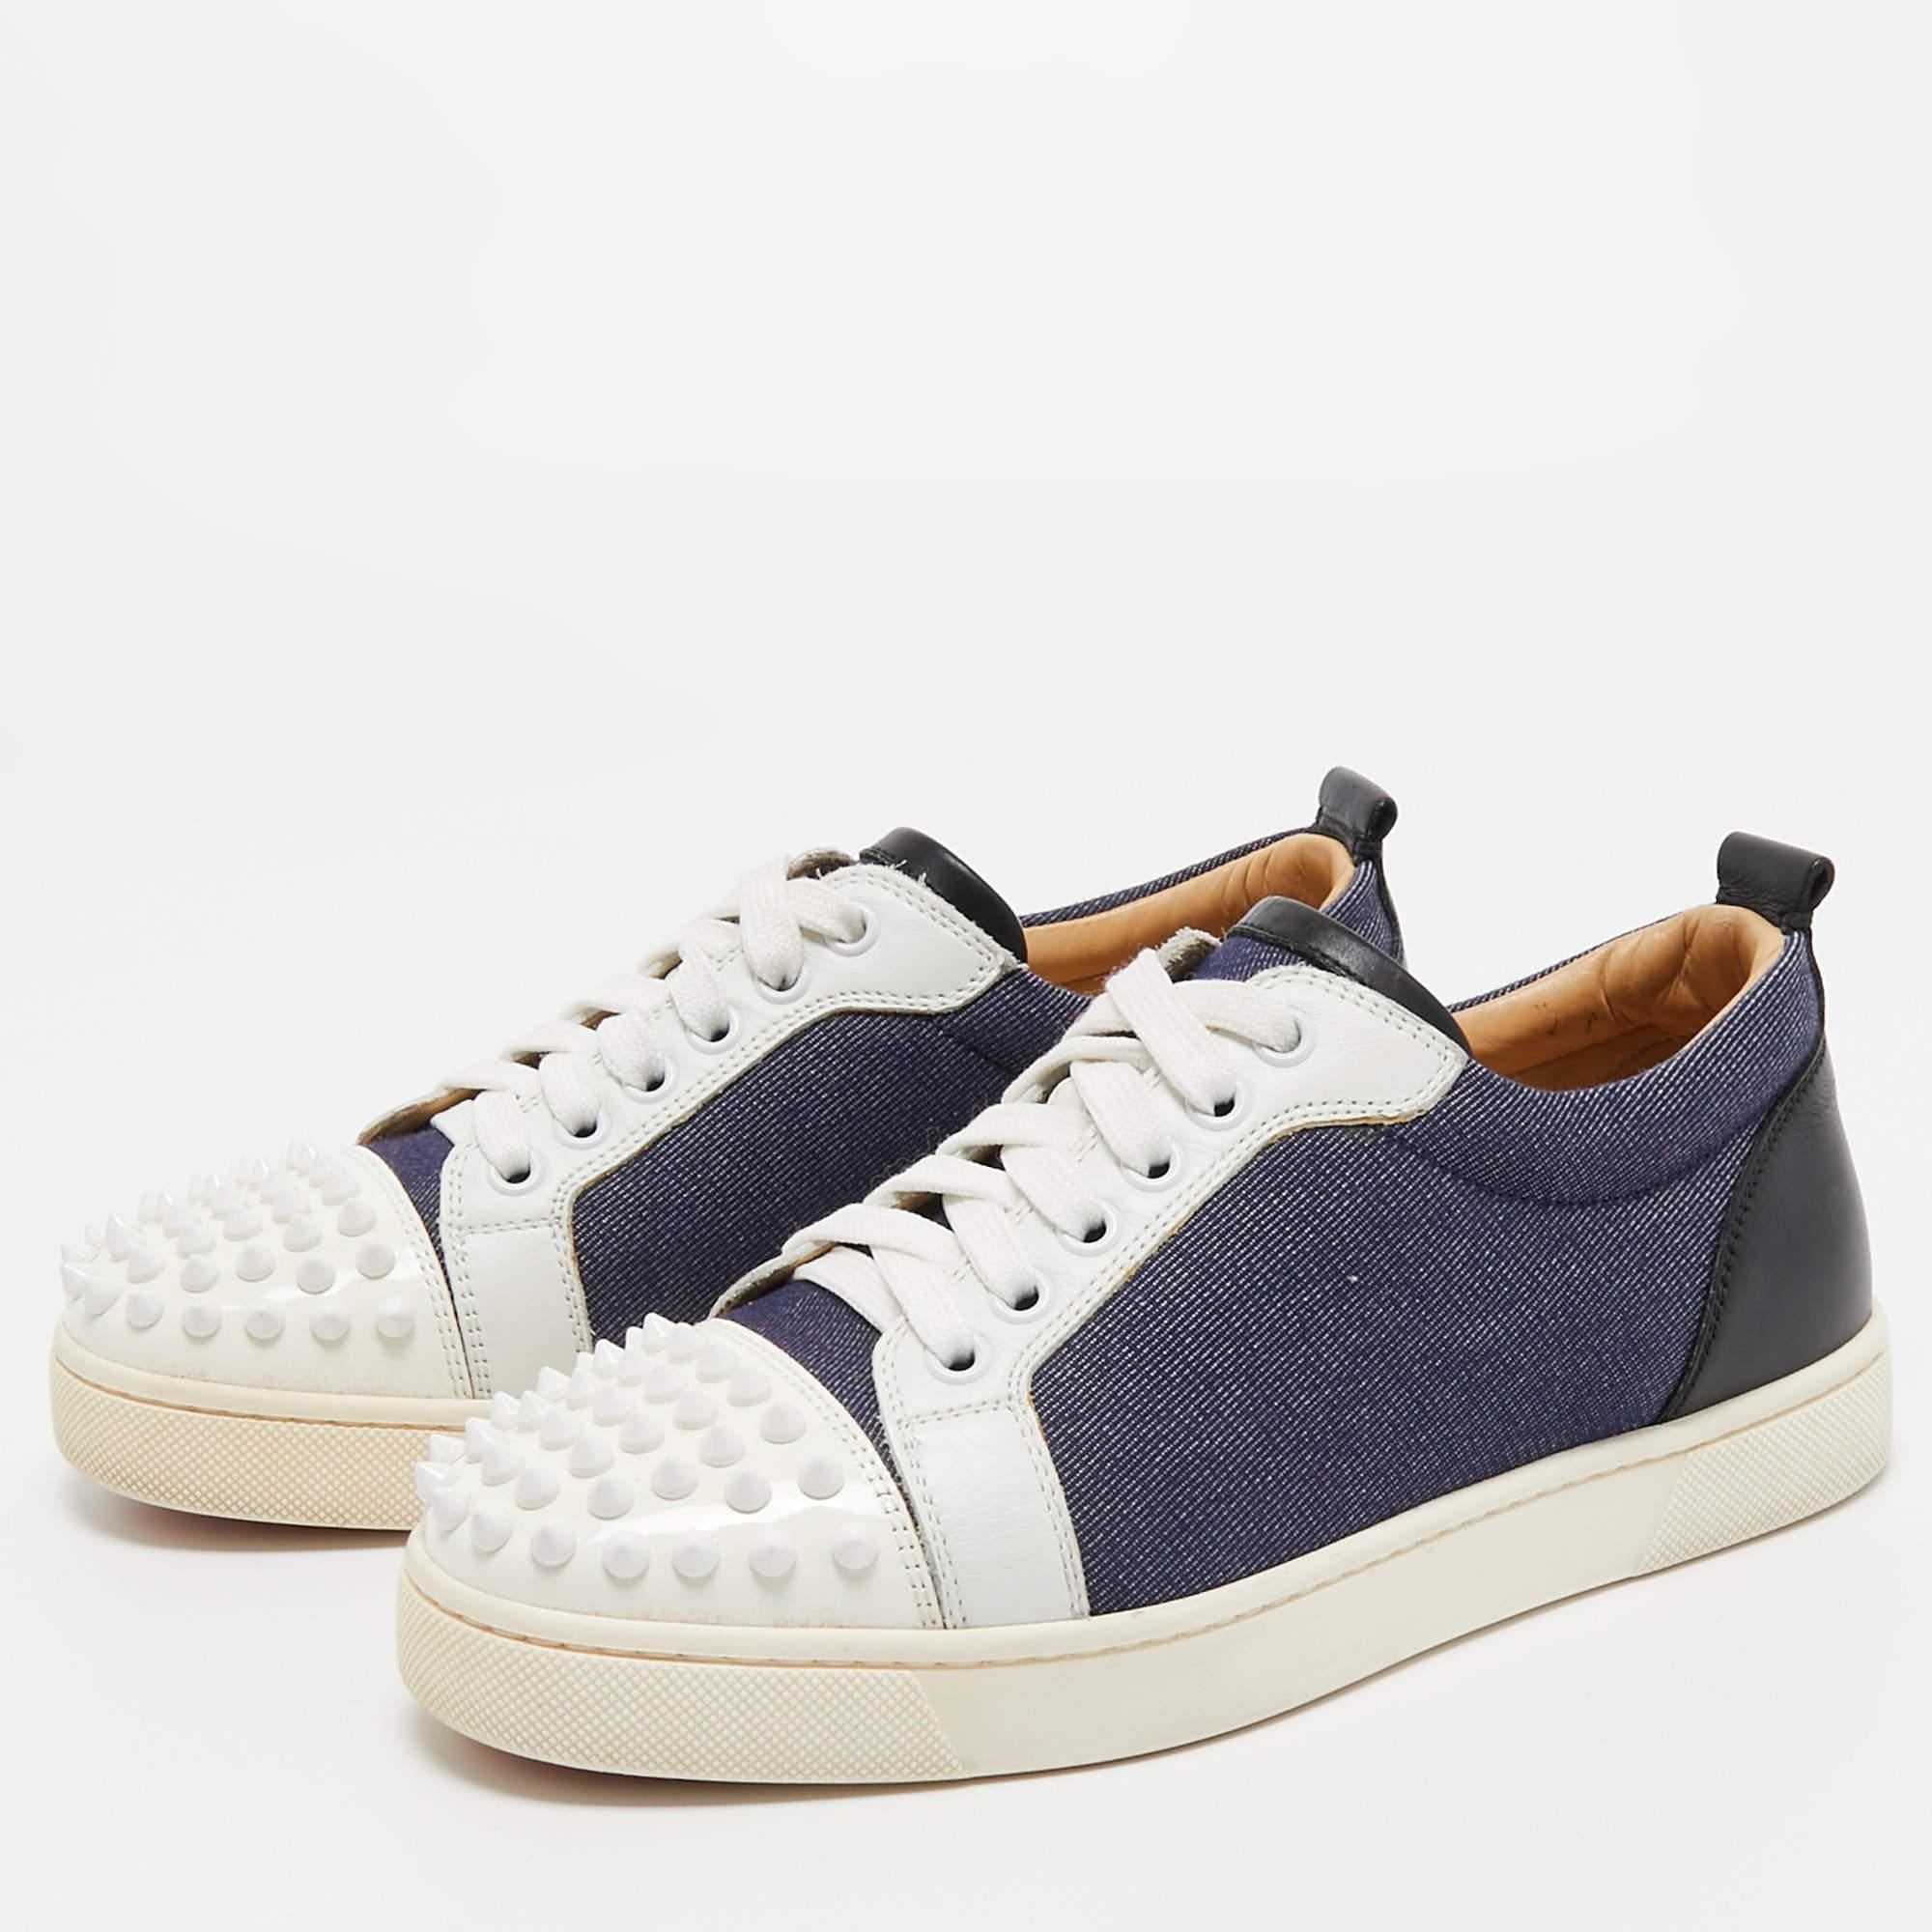 Christian Louboutin Blue/White Denim and Leather Spikes Low Top Sneakers Size 37 For Sale 3